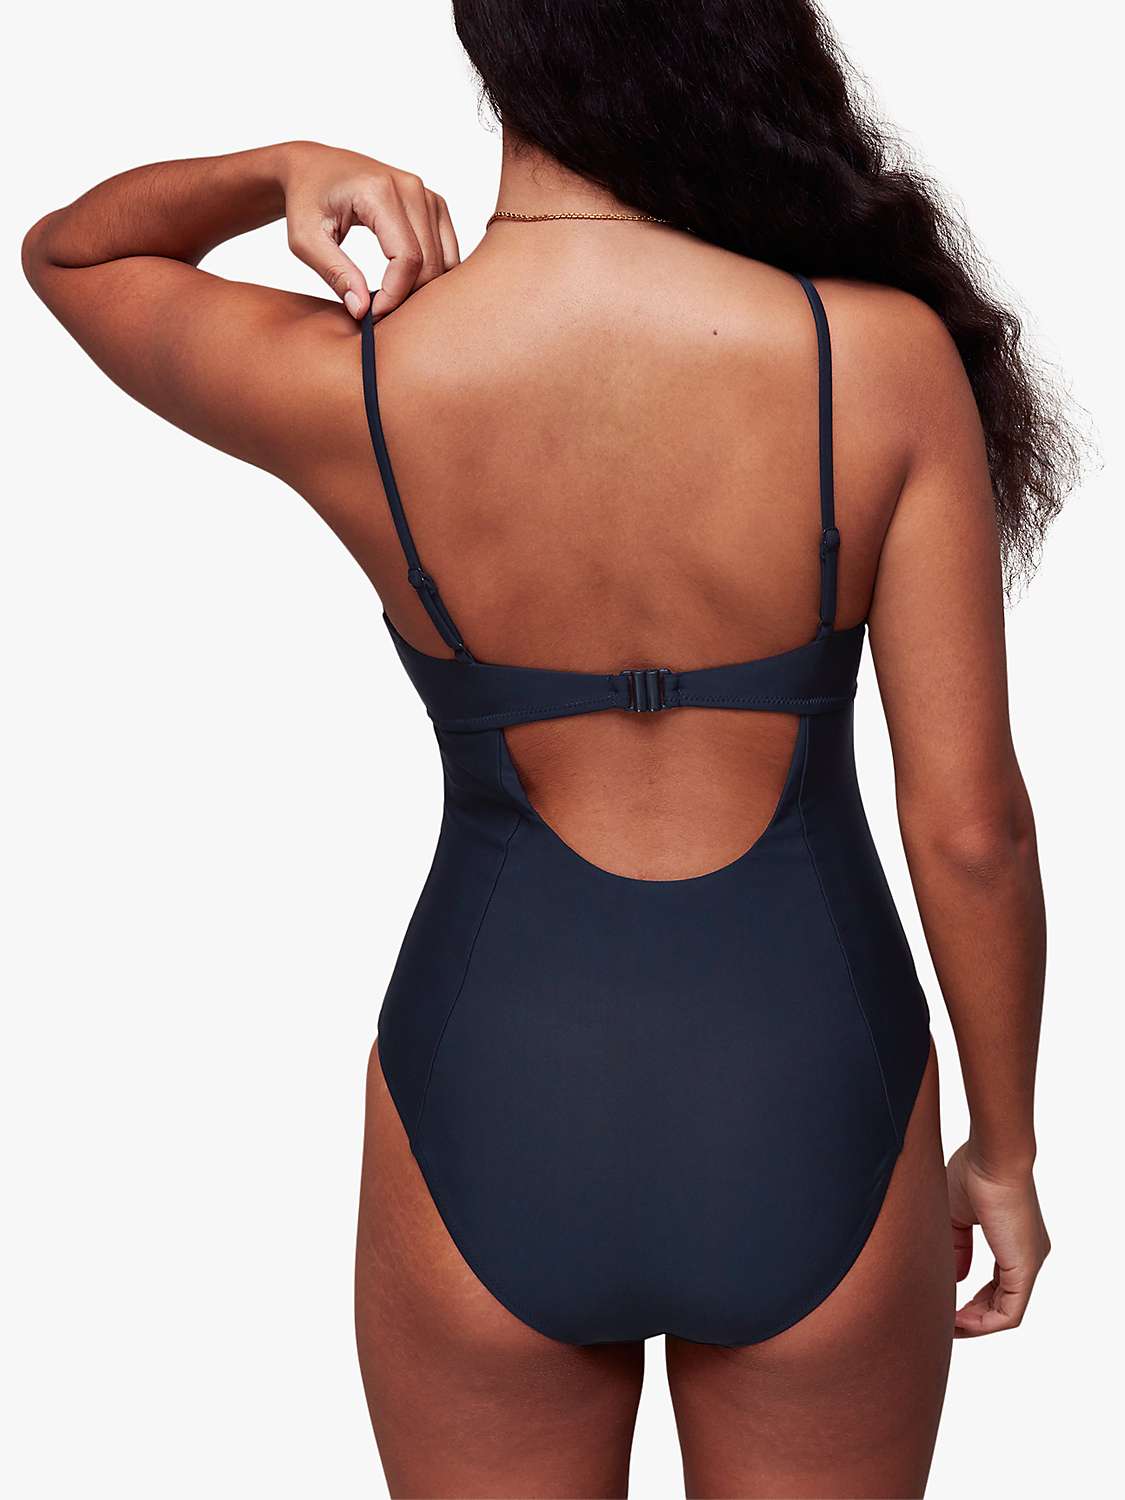 Buy Whistles Cutout Swimsuit, Navy Online at johnlewis.com